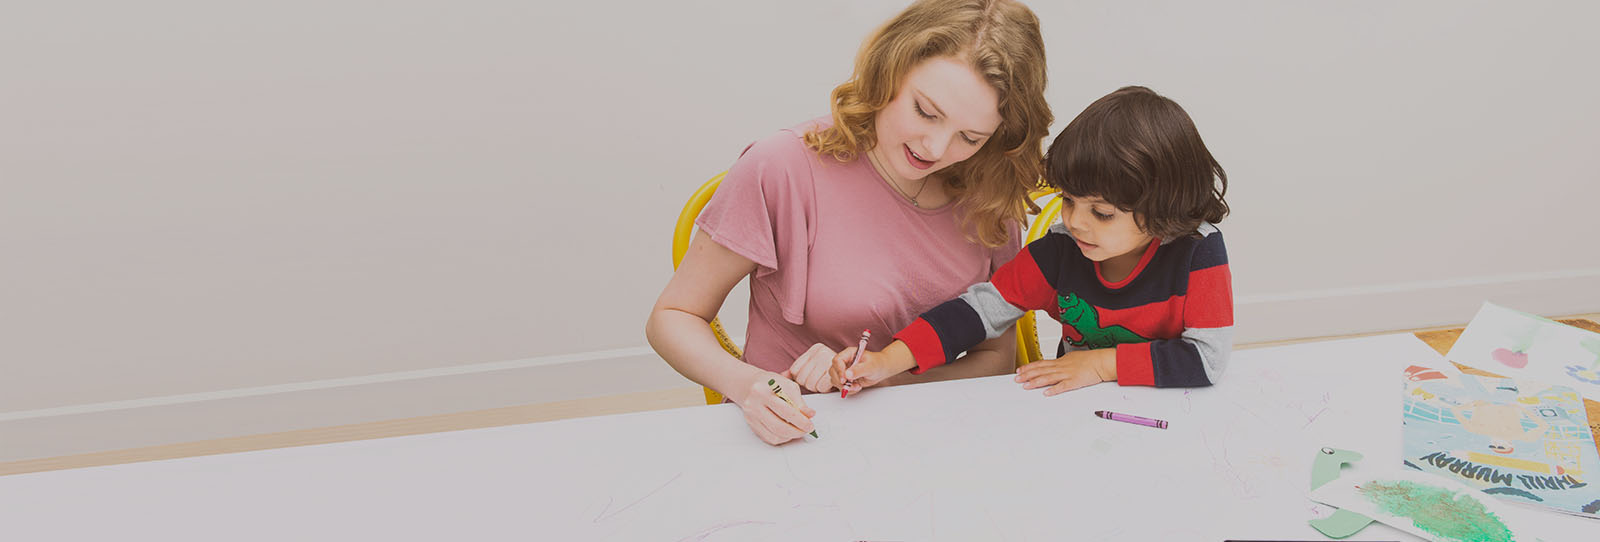 What is the best Au Pair Agency - Au Pair and Child Coloring